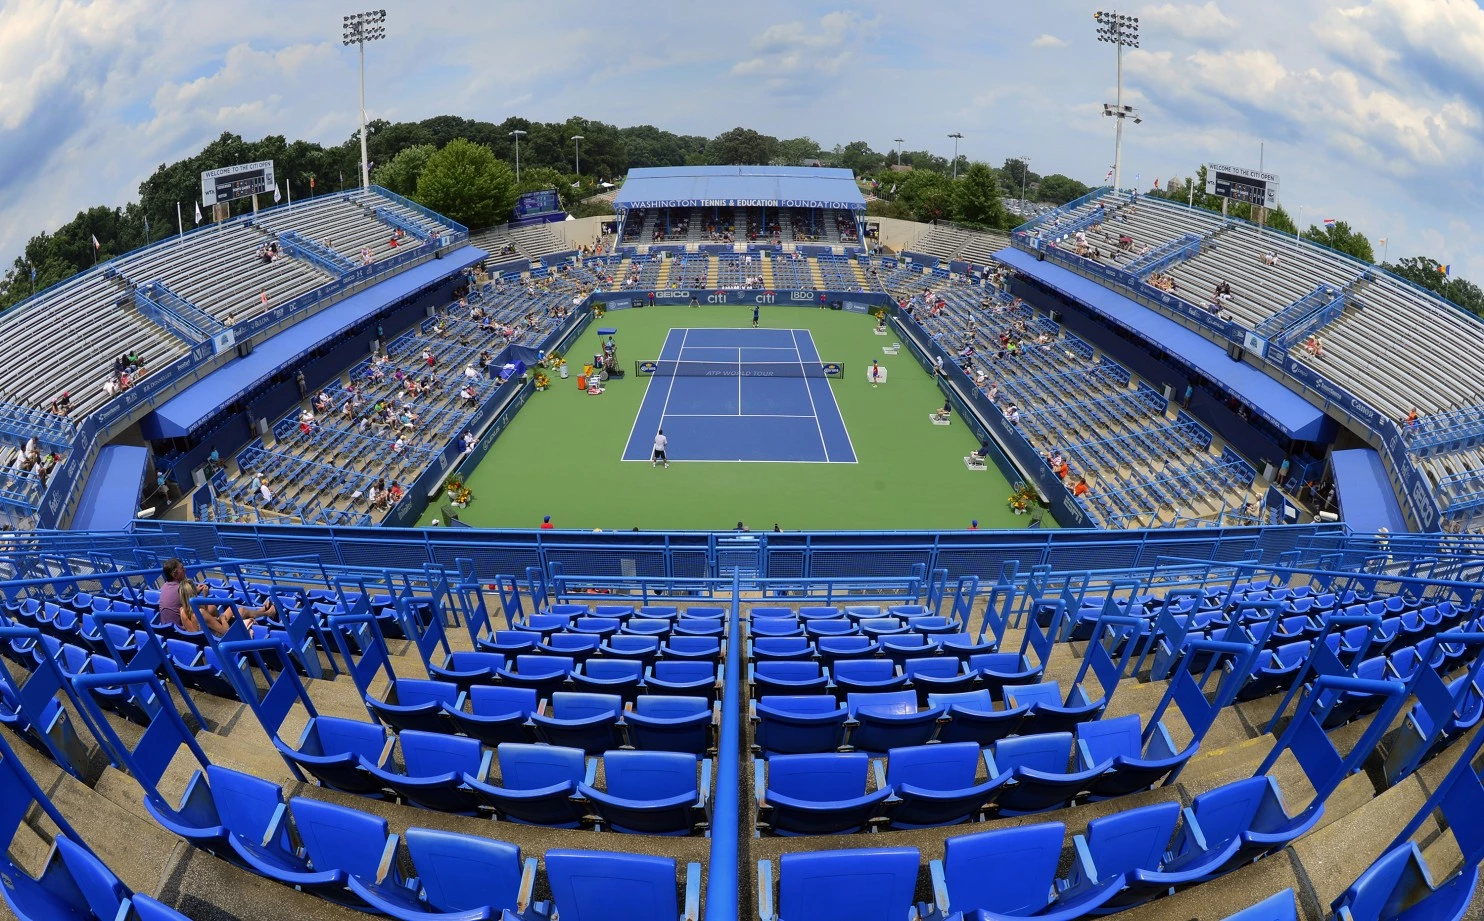 Behind the Scenes at the Citi Open